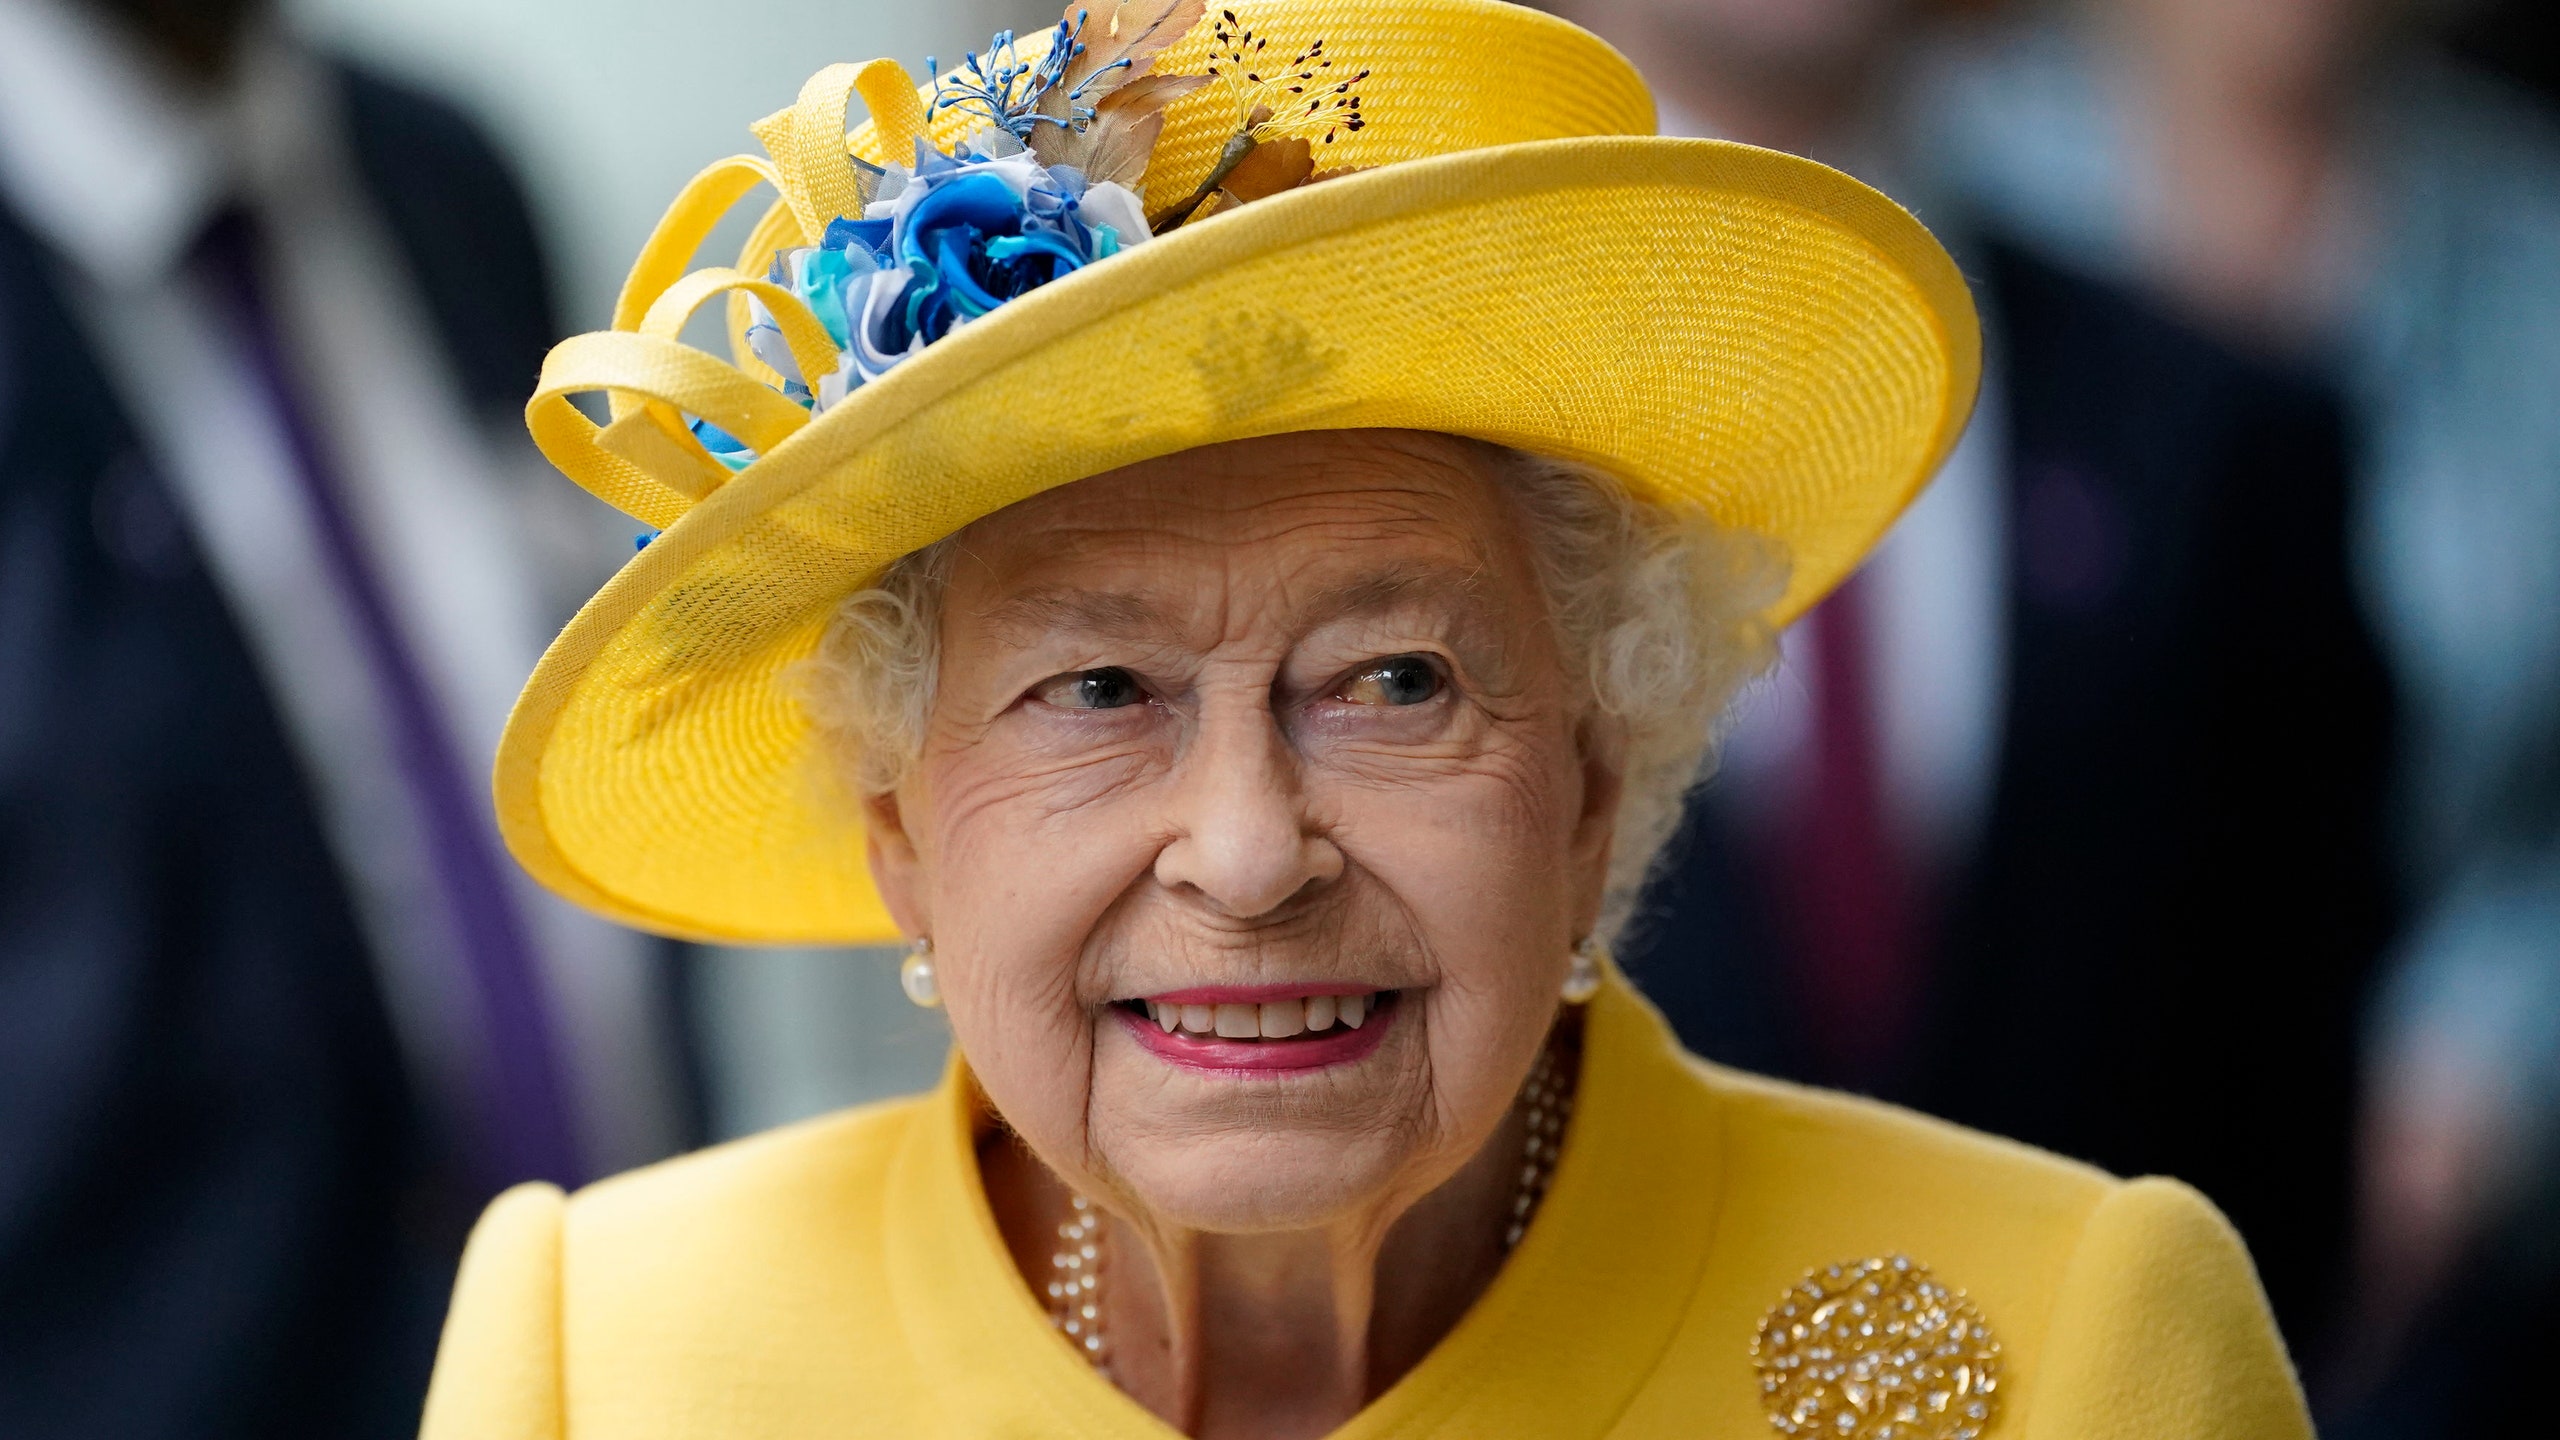 Will St George's Chapel at Windsor be The Final Resting Spot of Queen Elizabeth II?